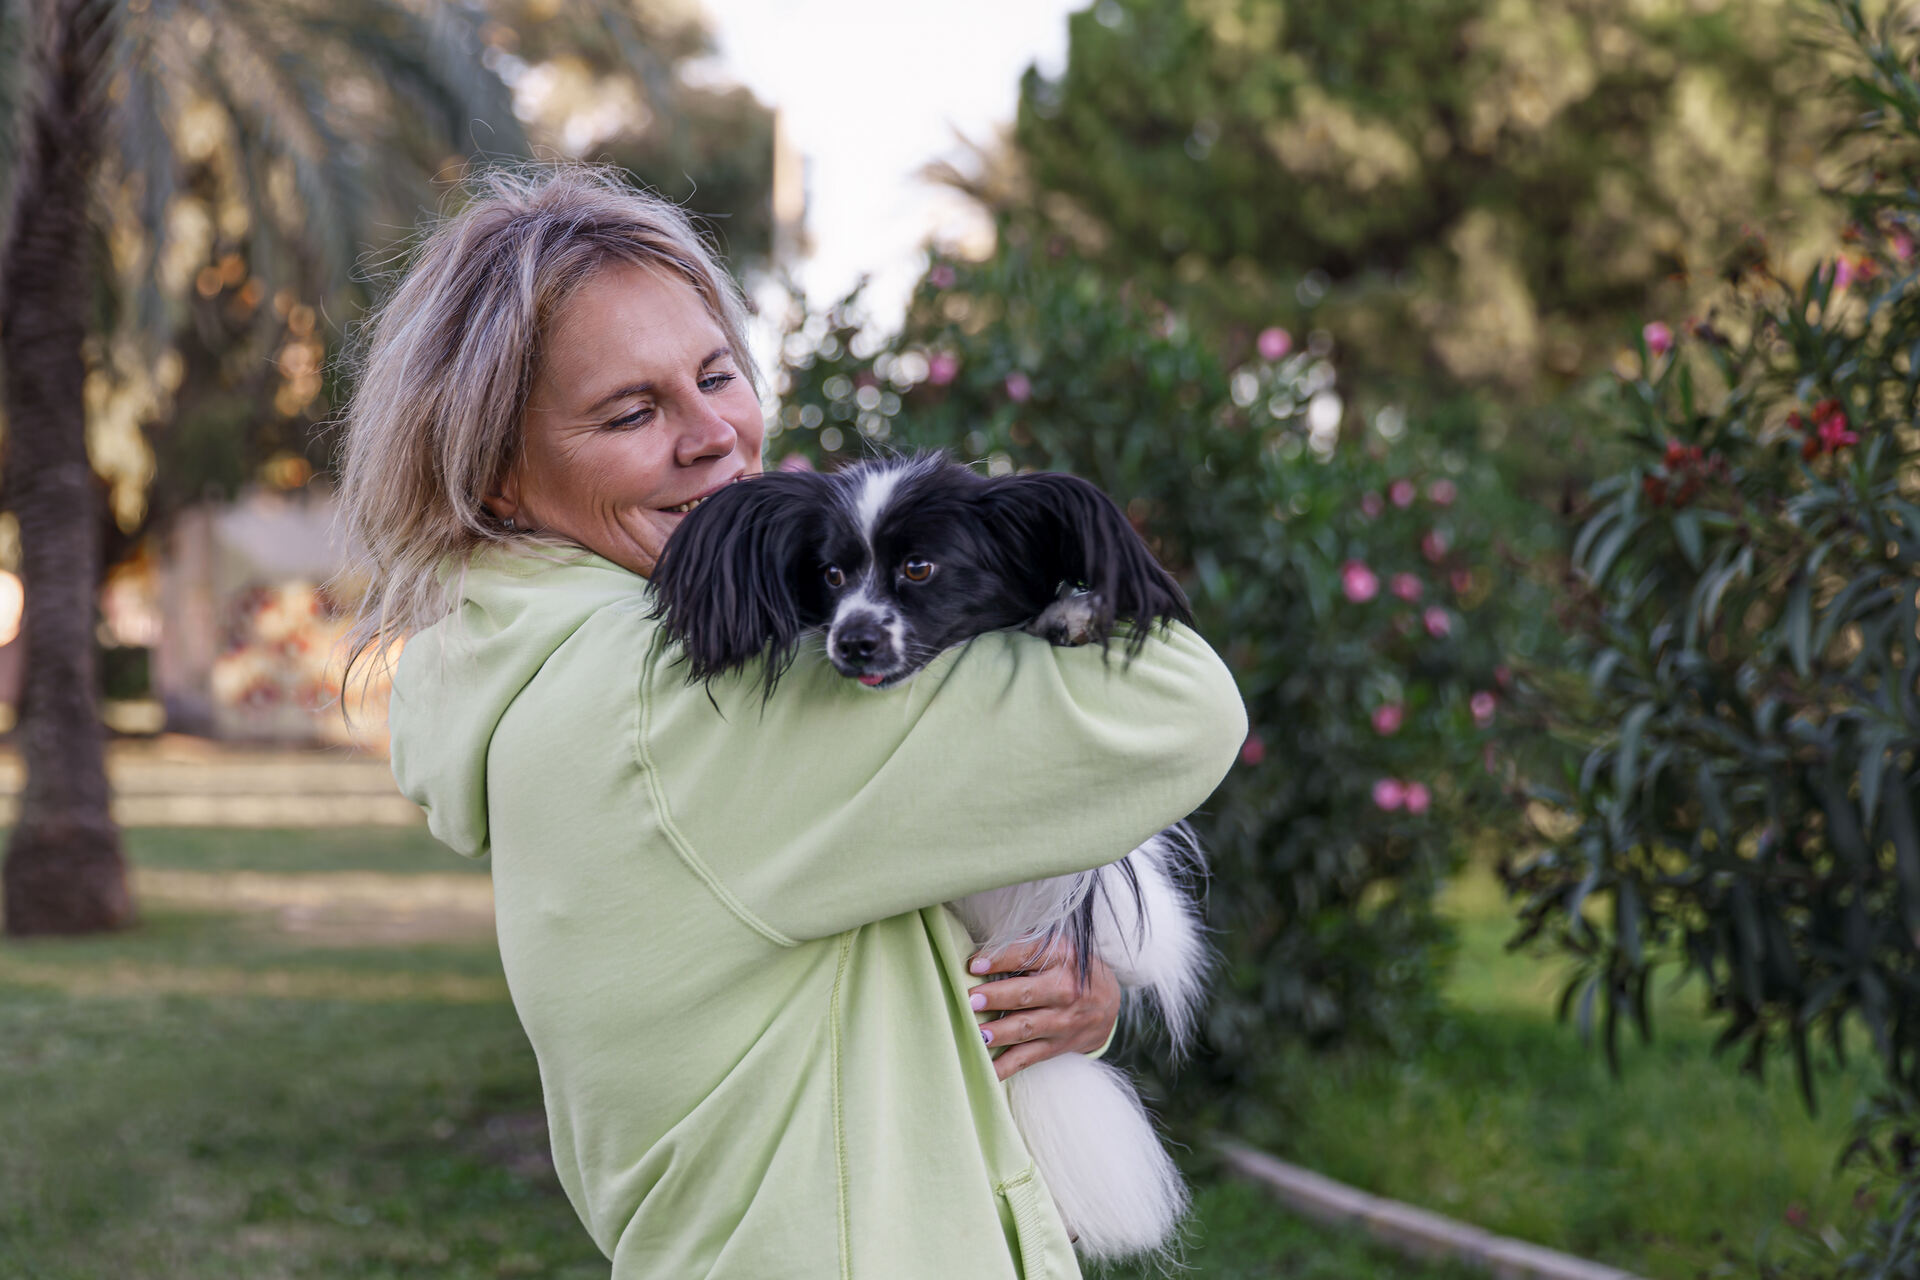 A woman hugging a small dog at a park